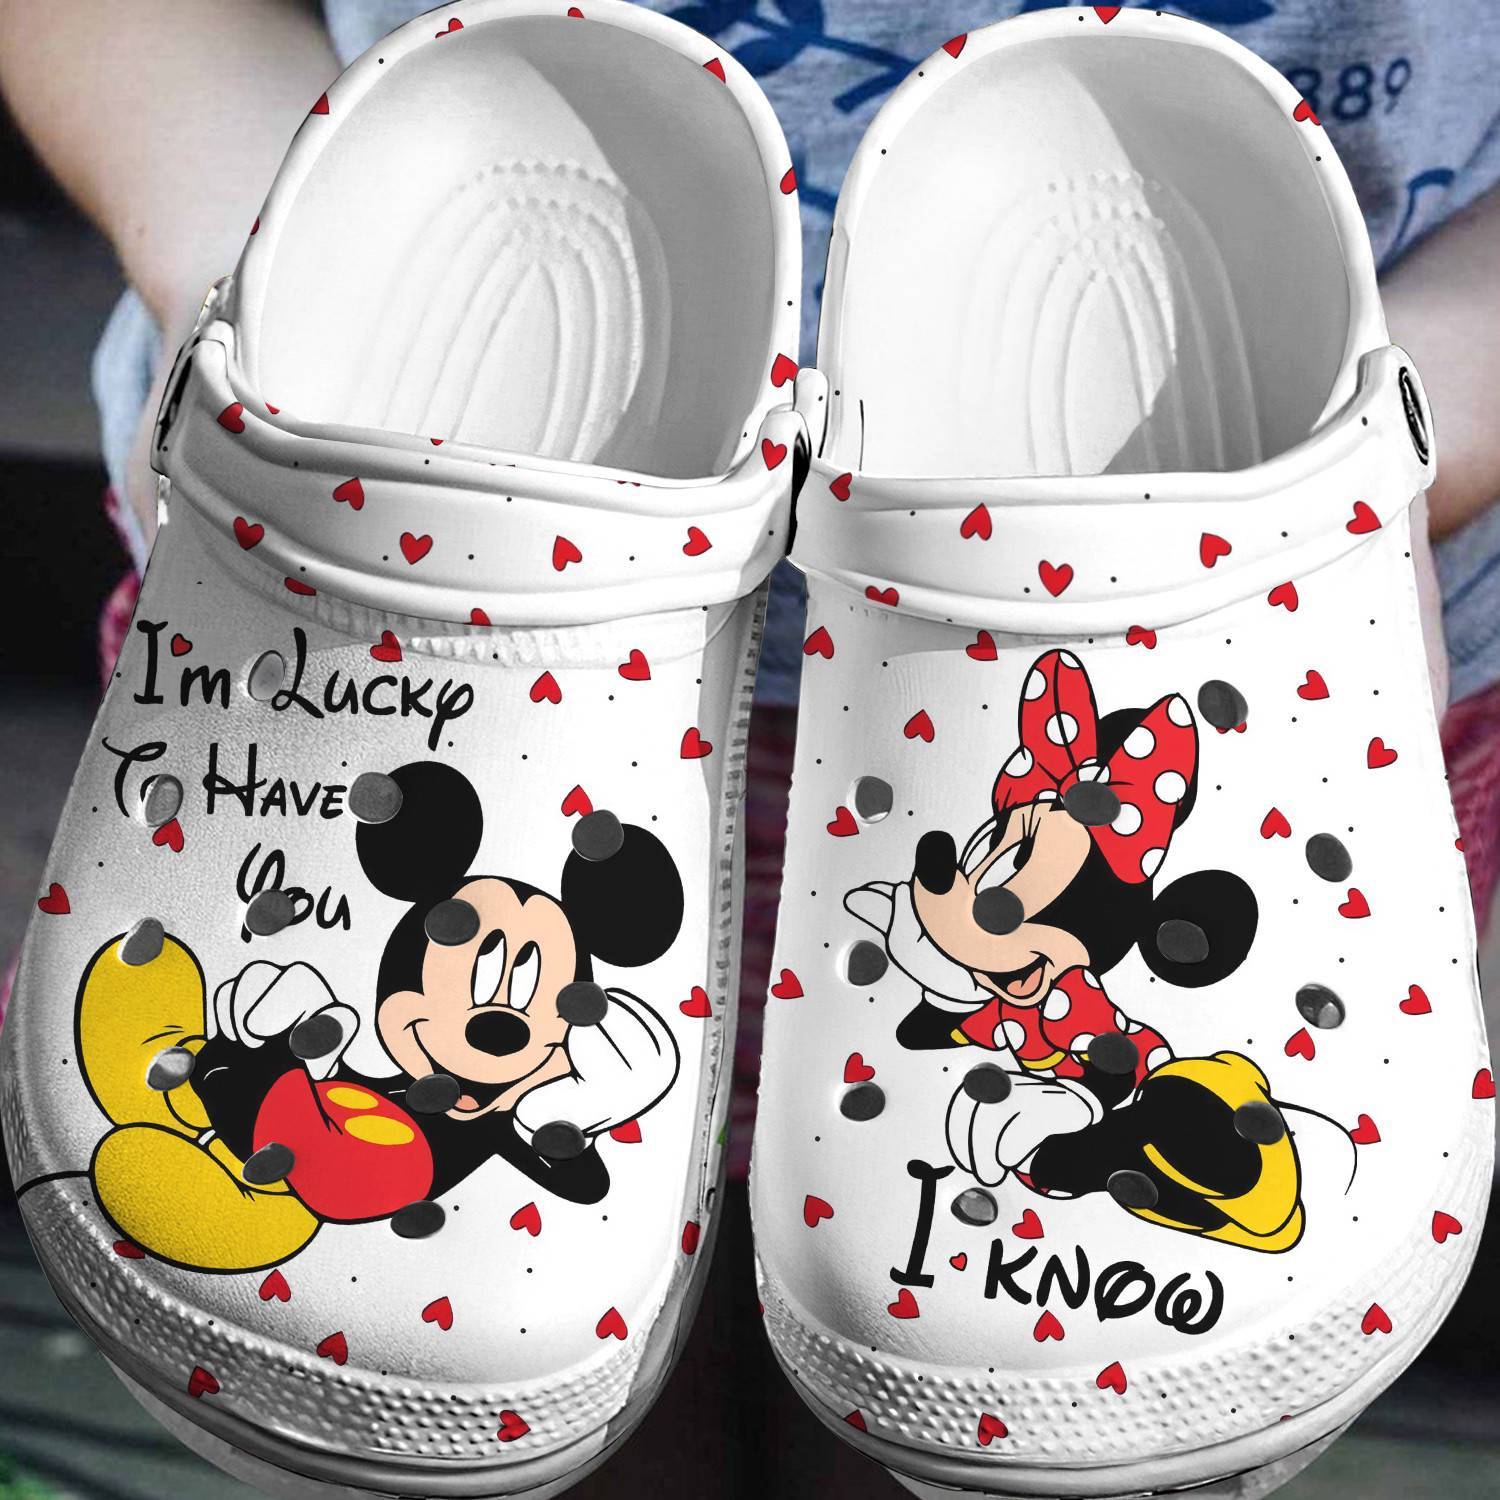 Mickey Minnie Adventure: 3D Clog Shoes by Crocs – Let Your Feet Join the Fun